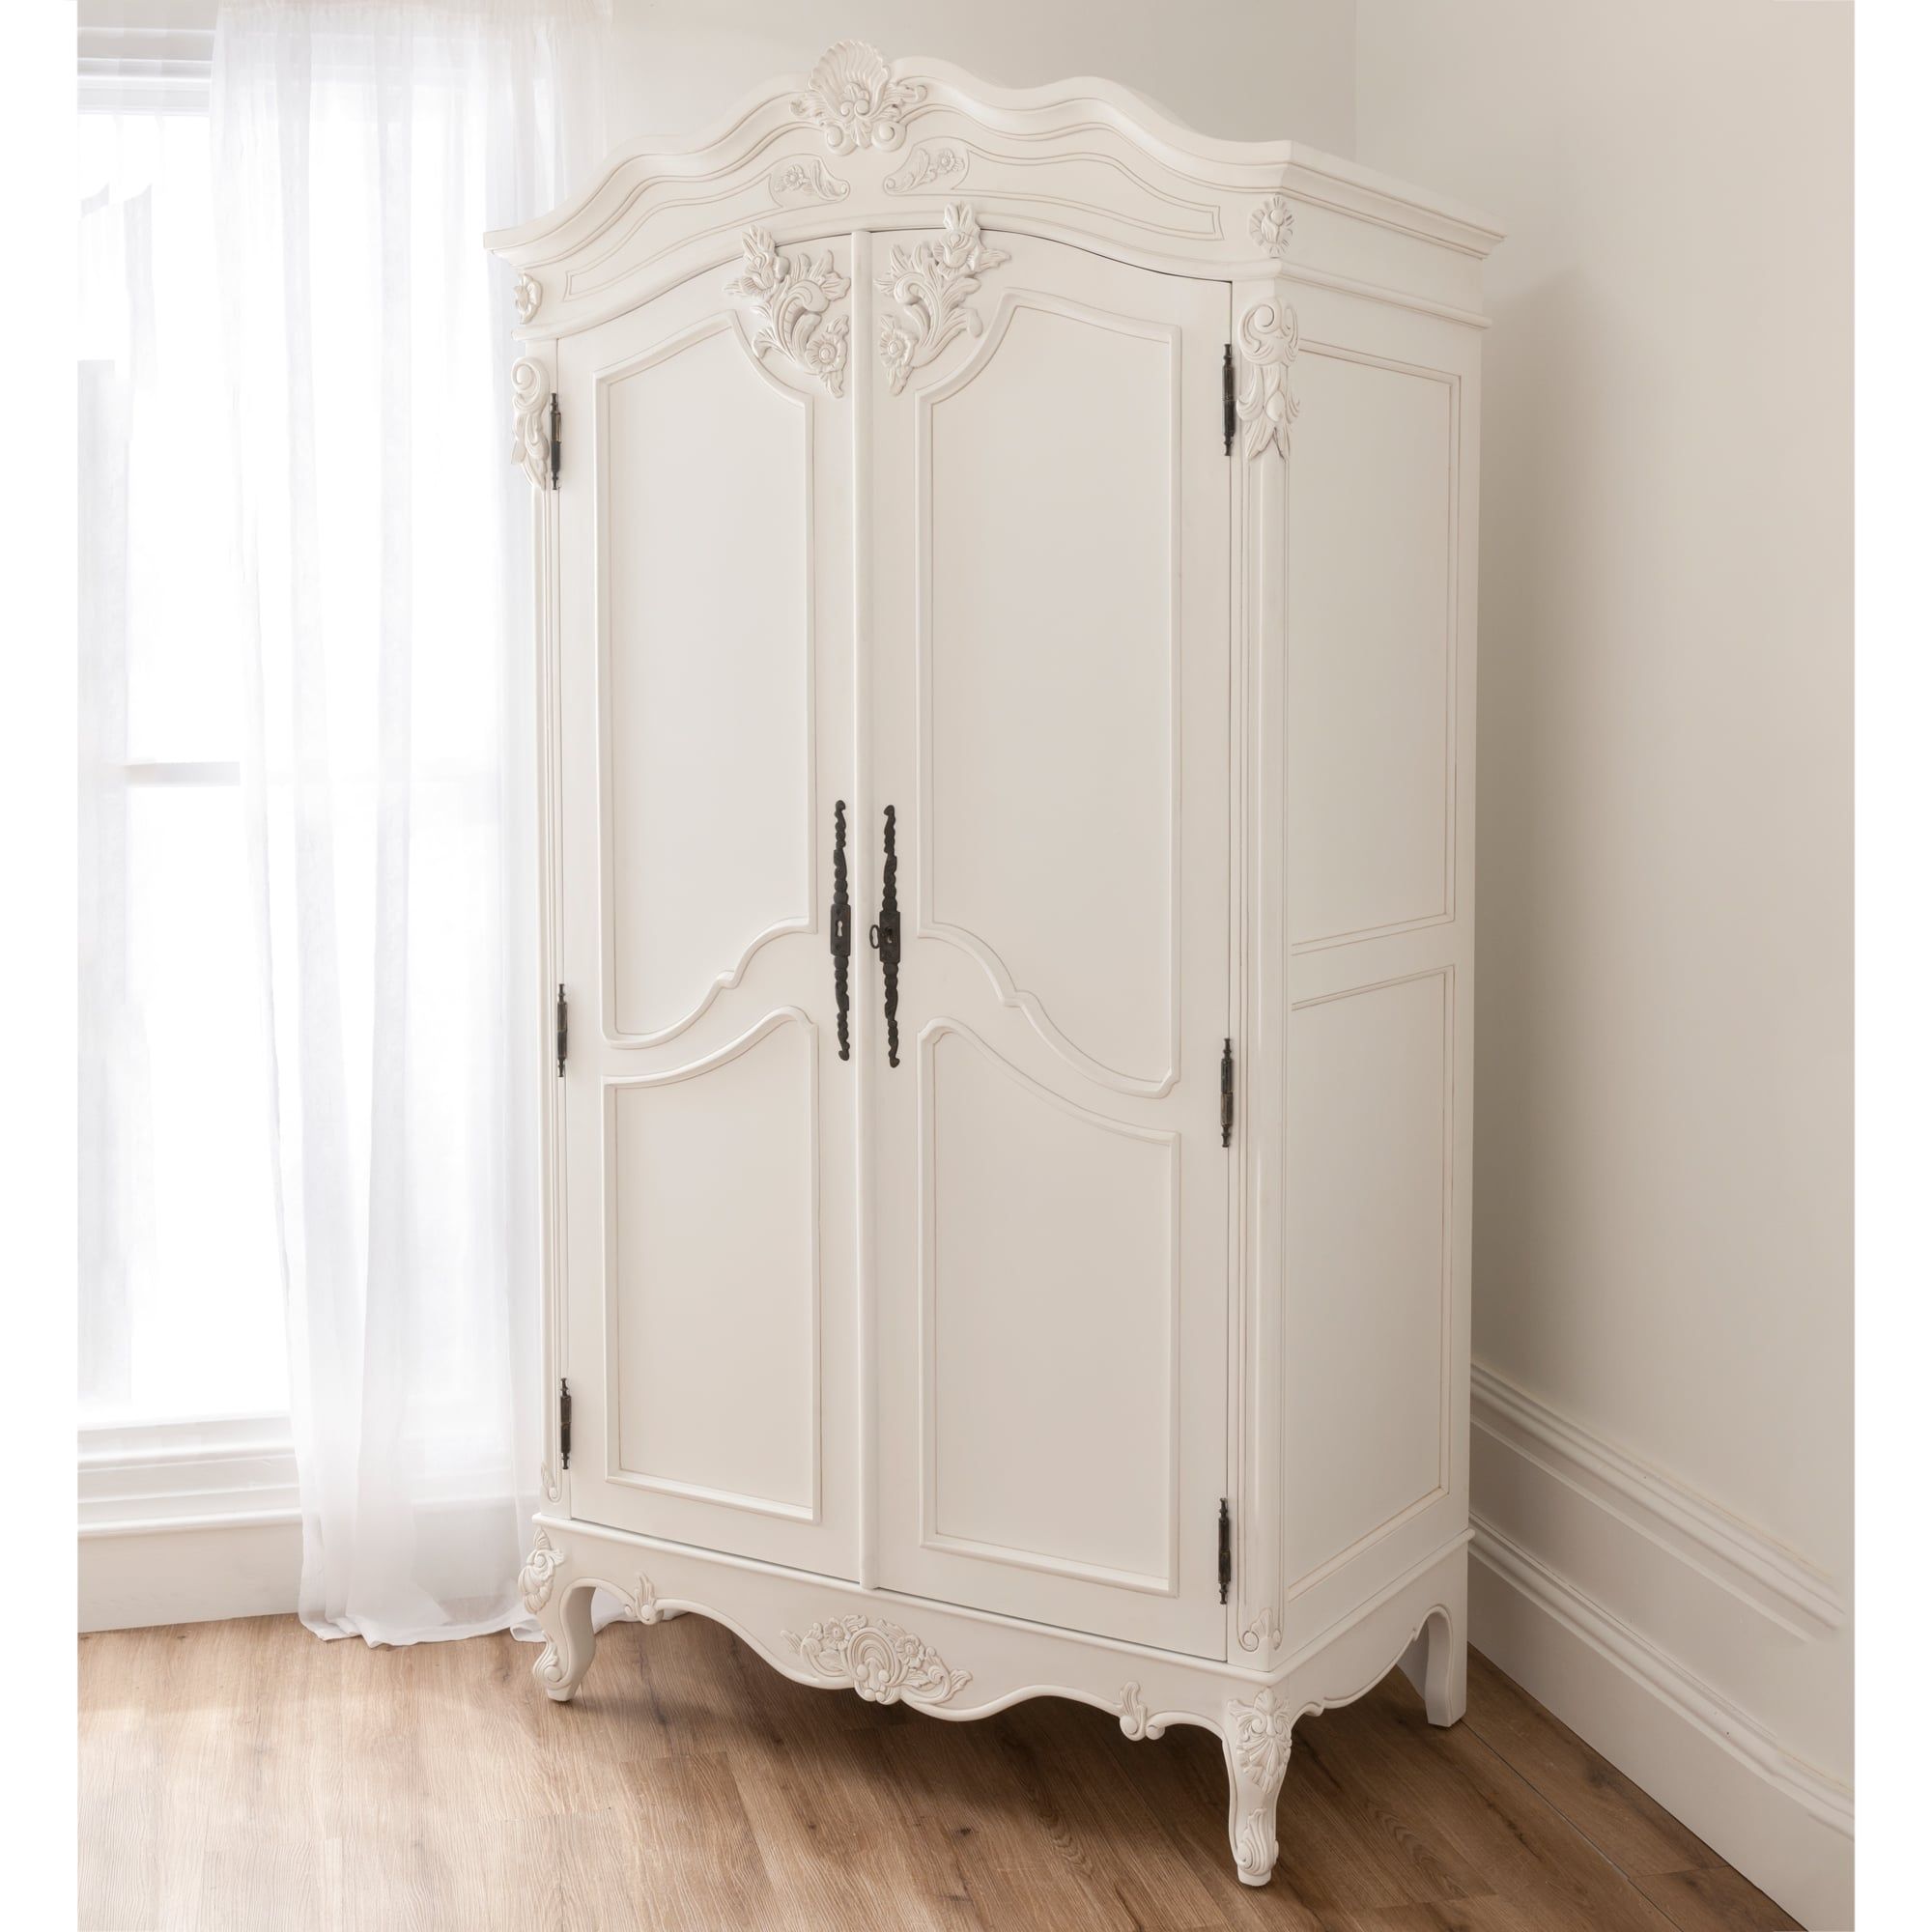 Baroque Antique French Wardrobe Is Available Online At Homesdirect365 Within French Wardrobes (View 8 of 15)